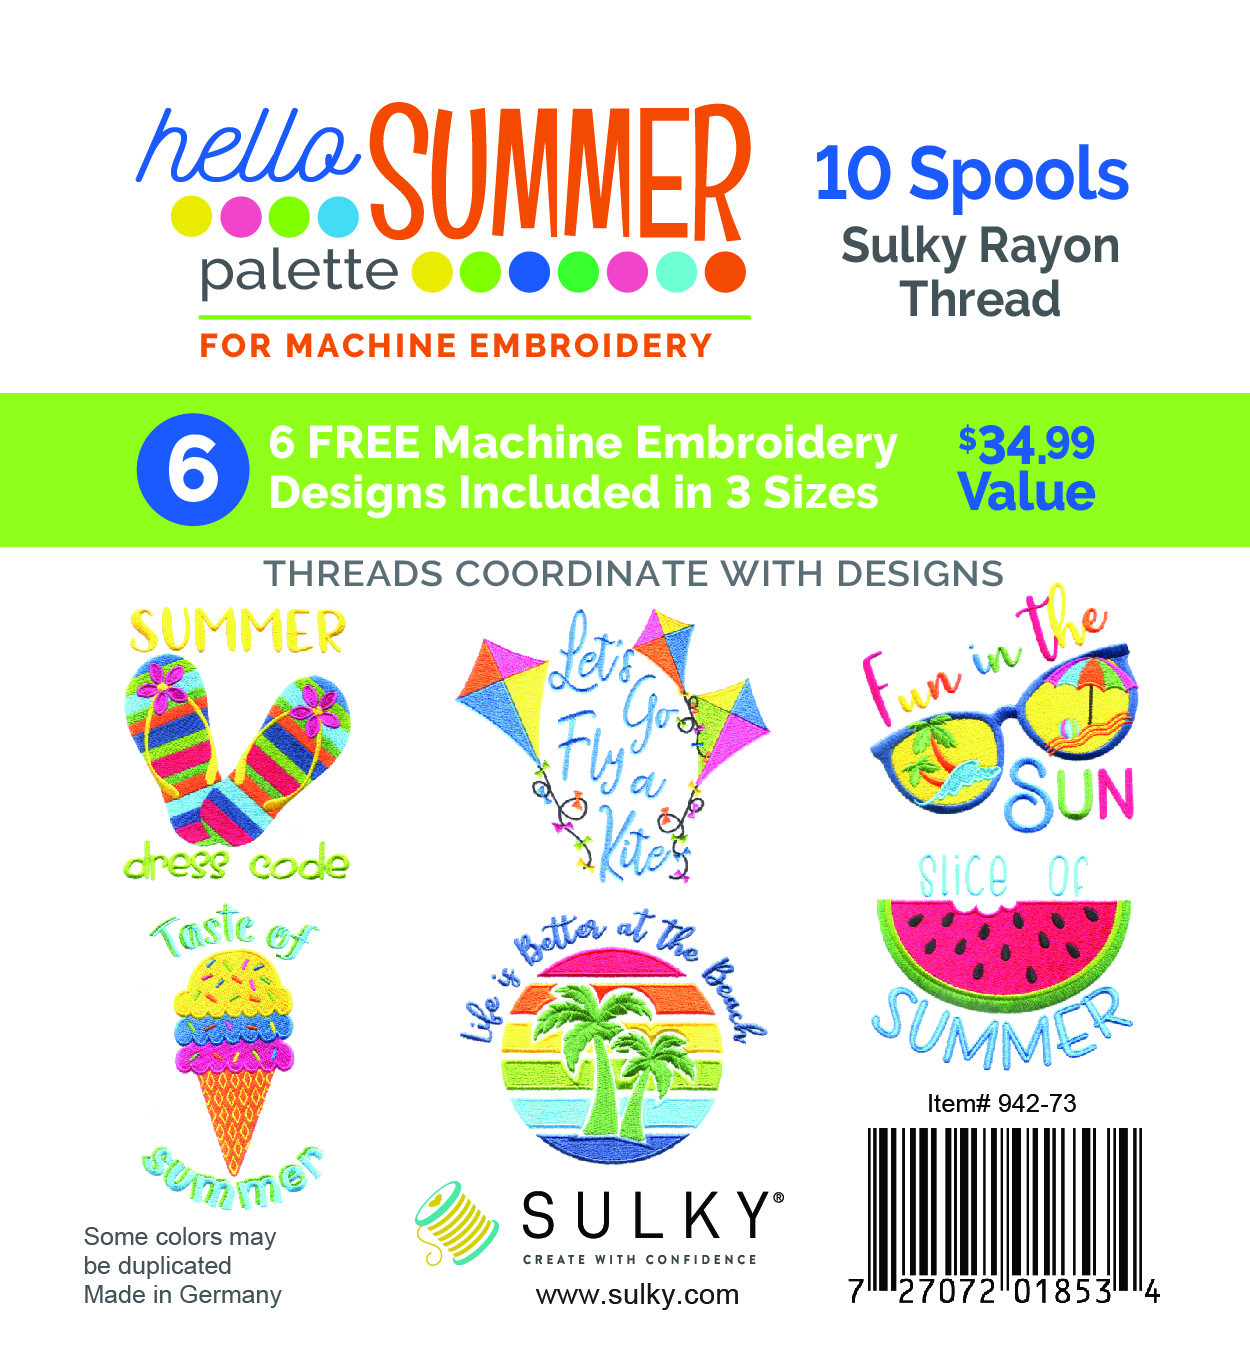 hello summer beach palette for embroidery